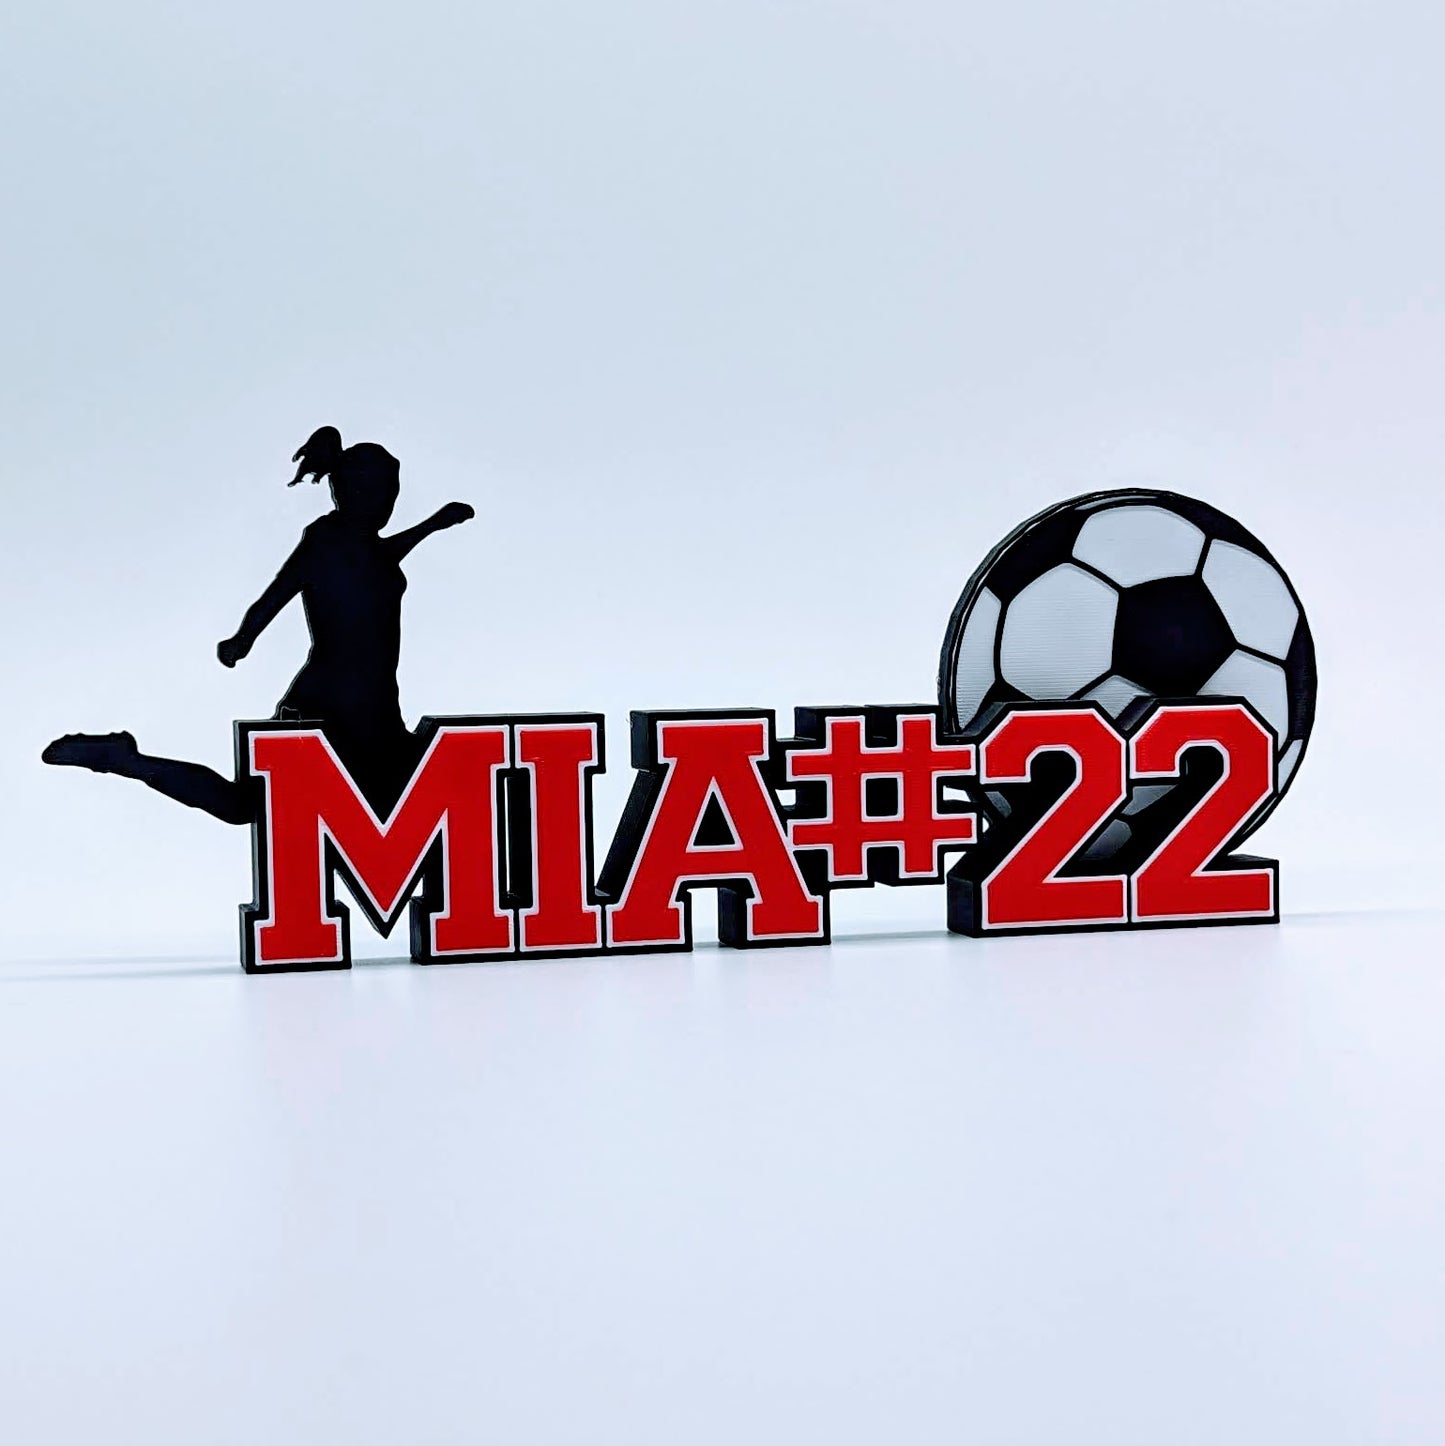 Customized Nameplate for Soccer Player